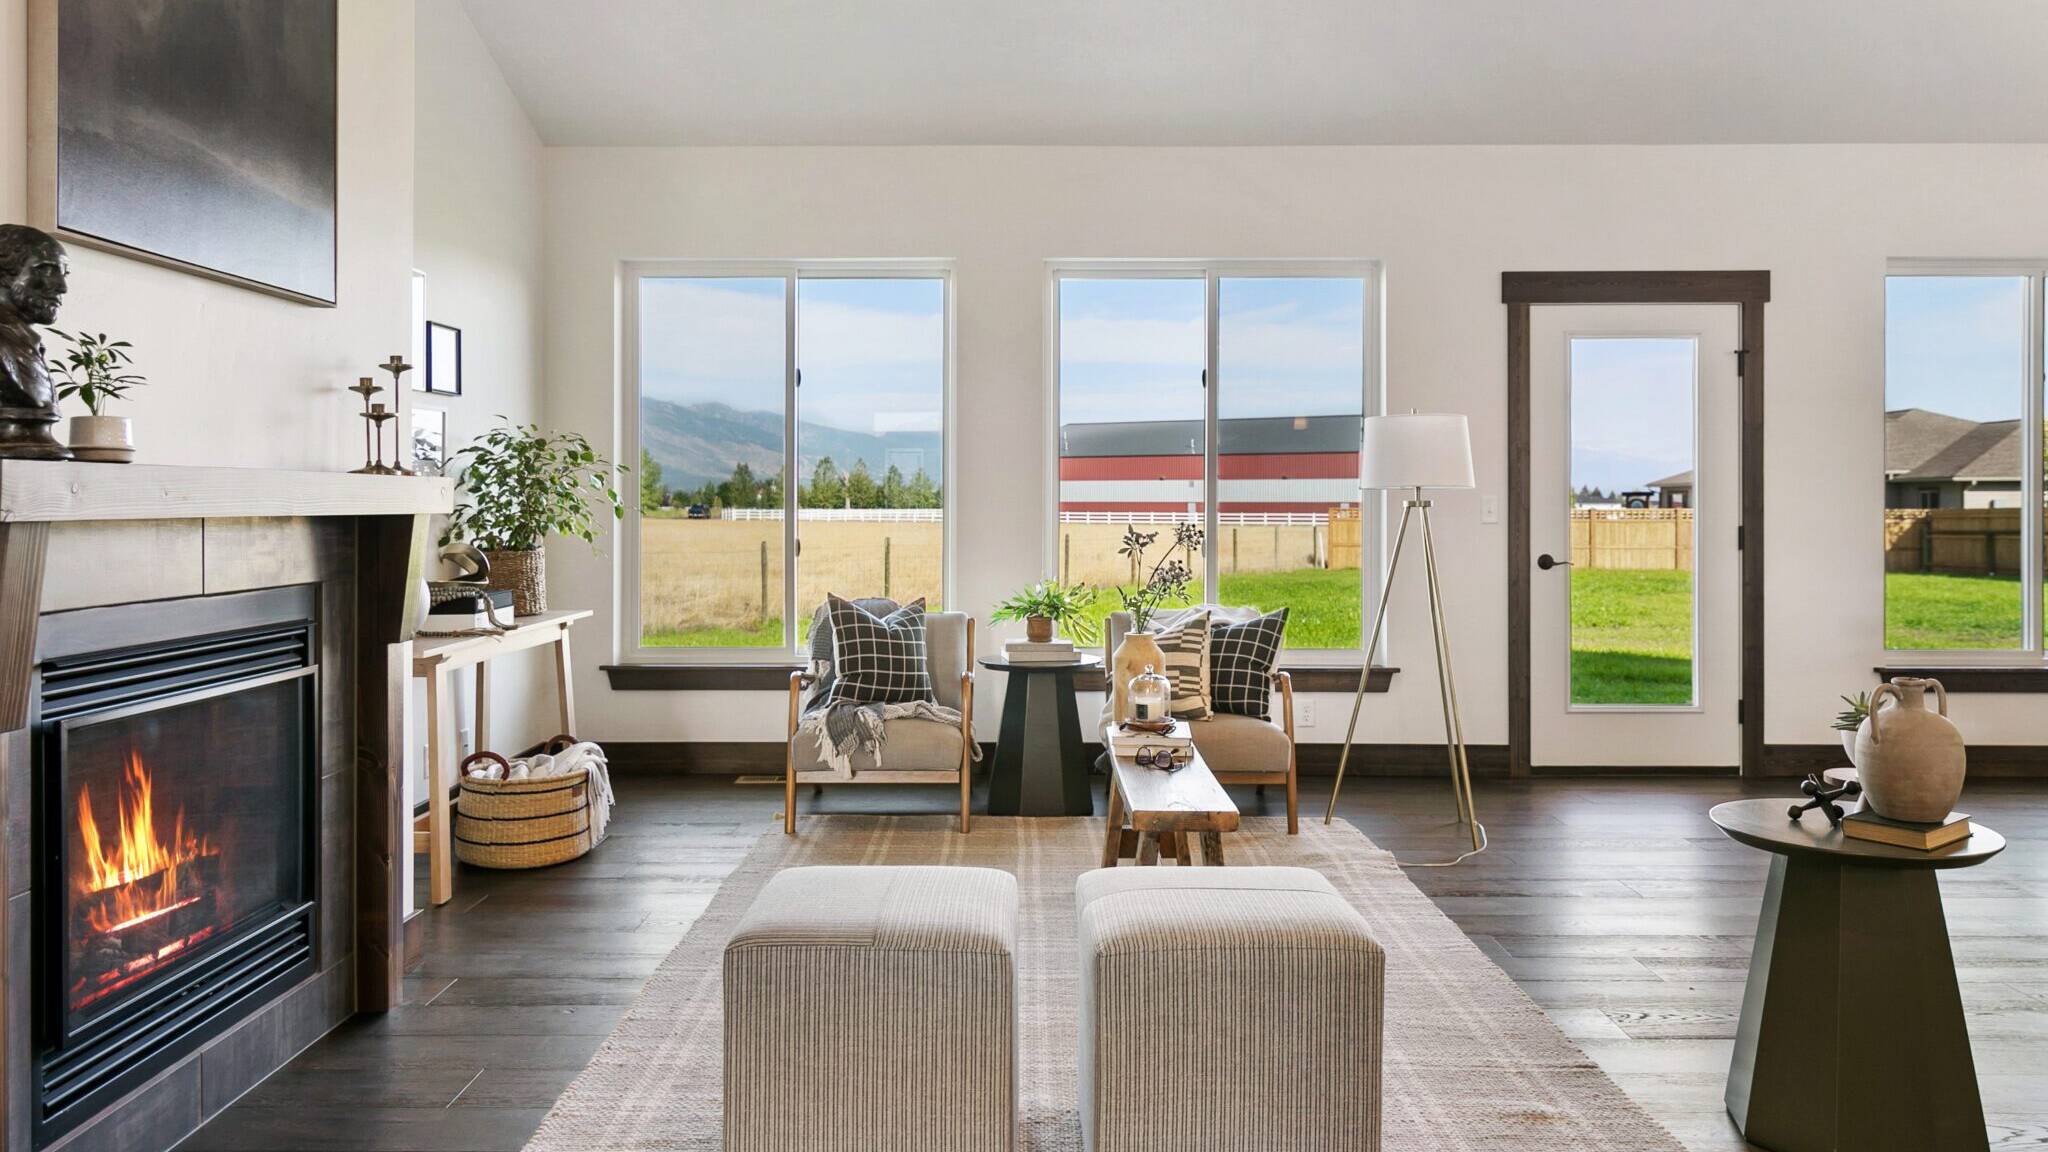 Living room in The Seeley model home - Built by Big Sky Builder in Hamilton, MT